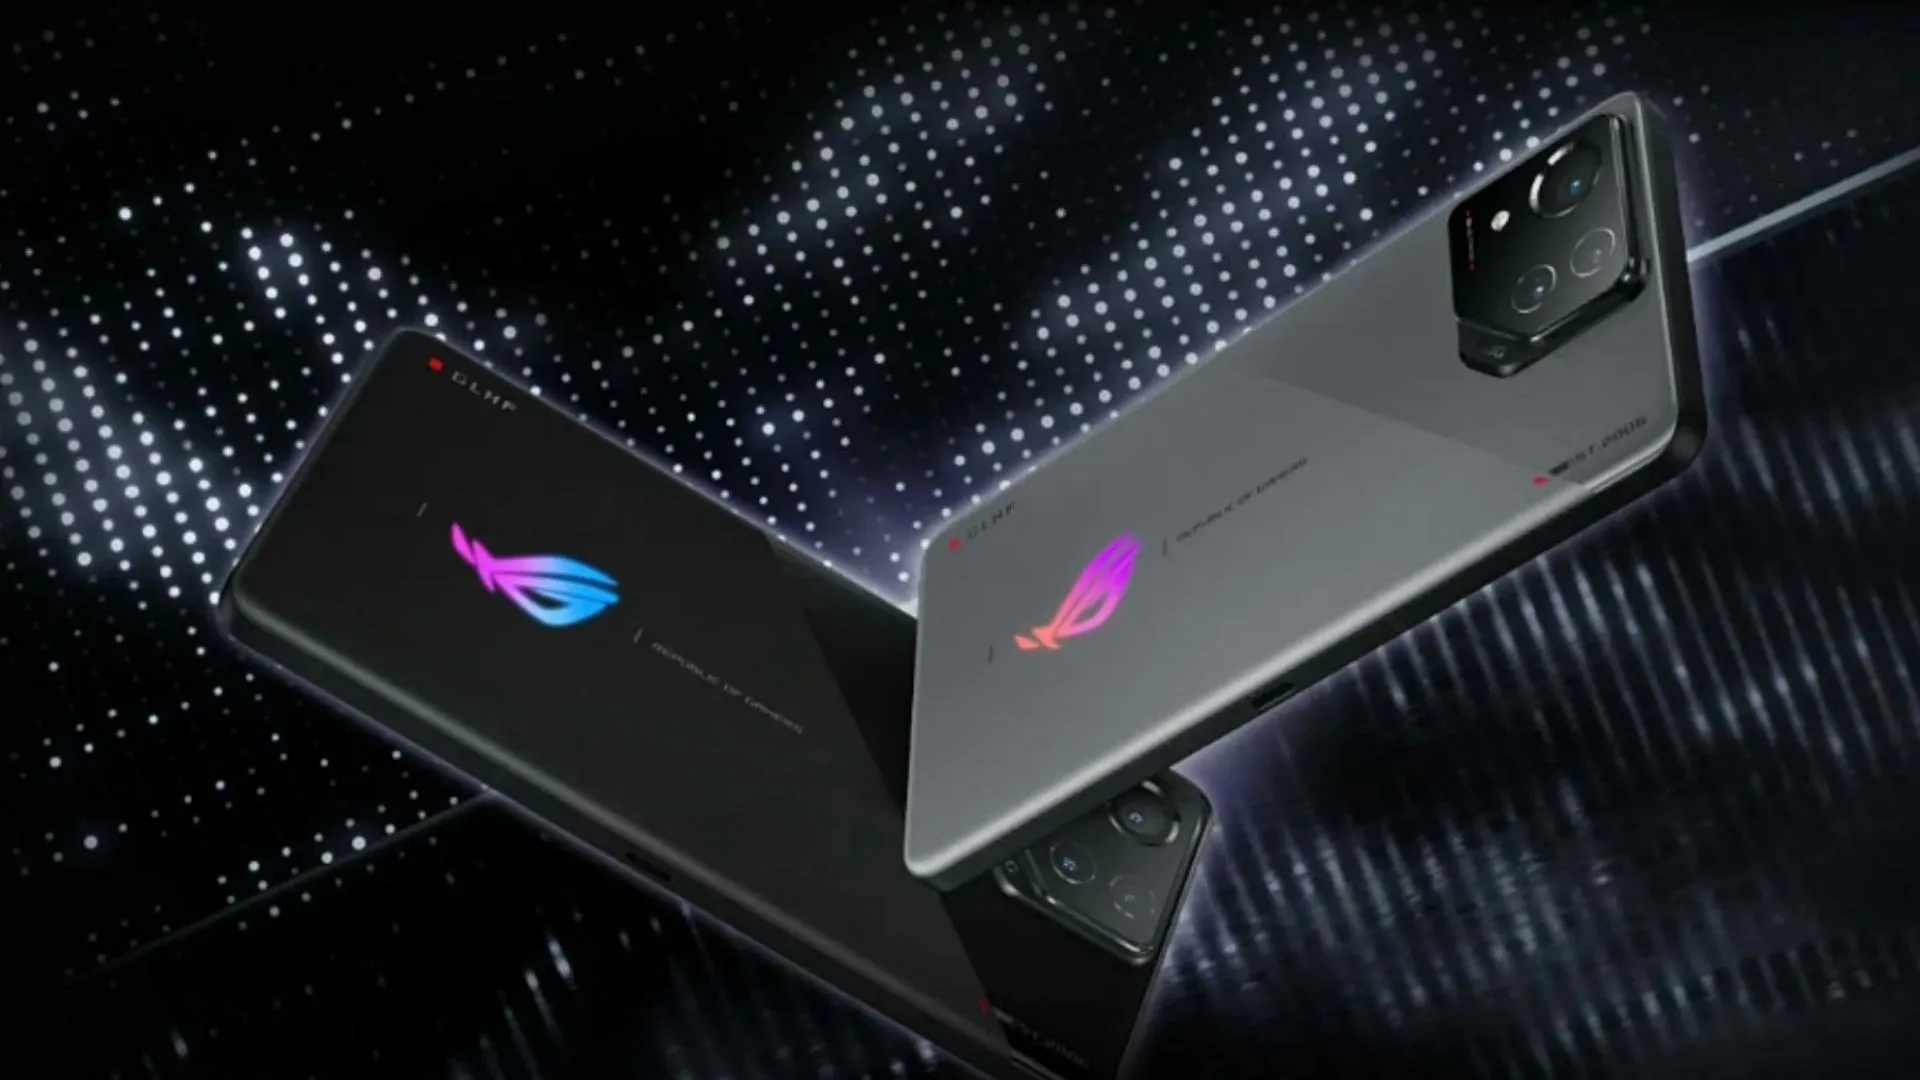 ASUS ROG Phone 8: Pricing and Availability